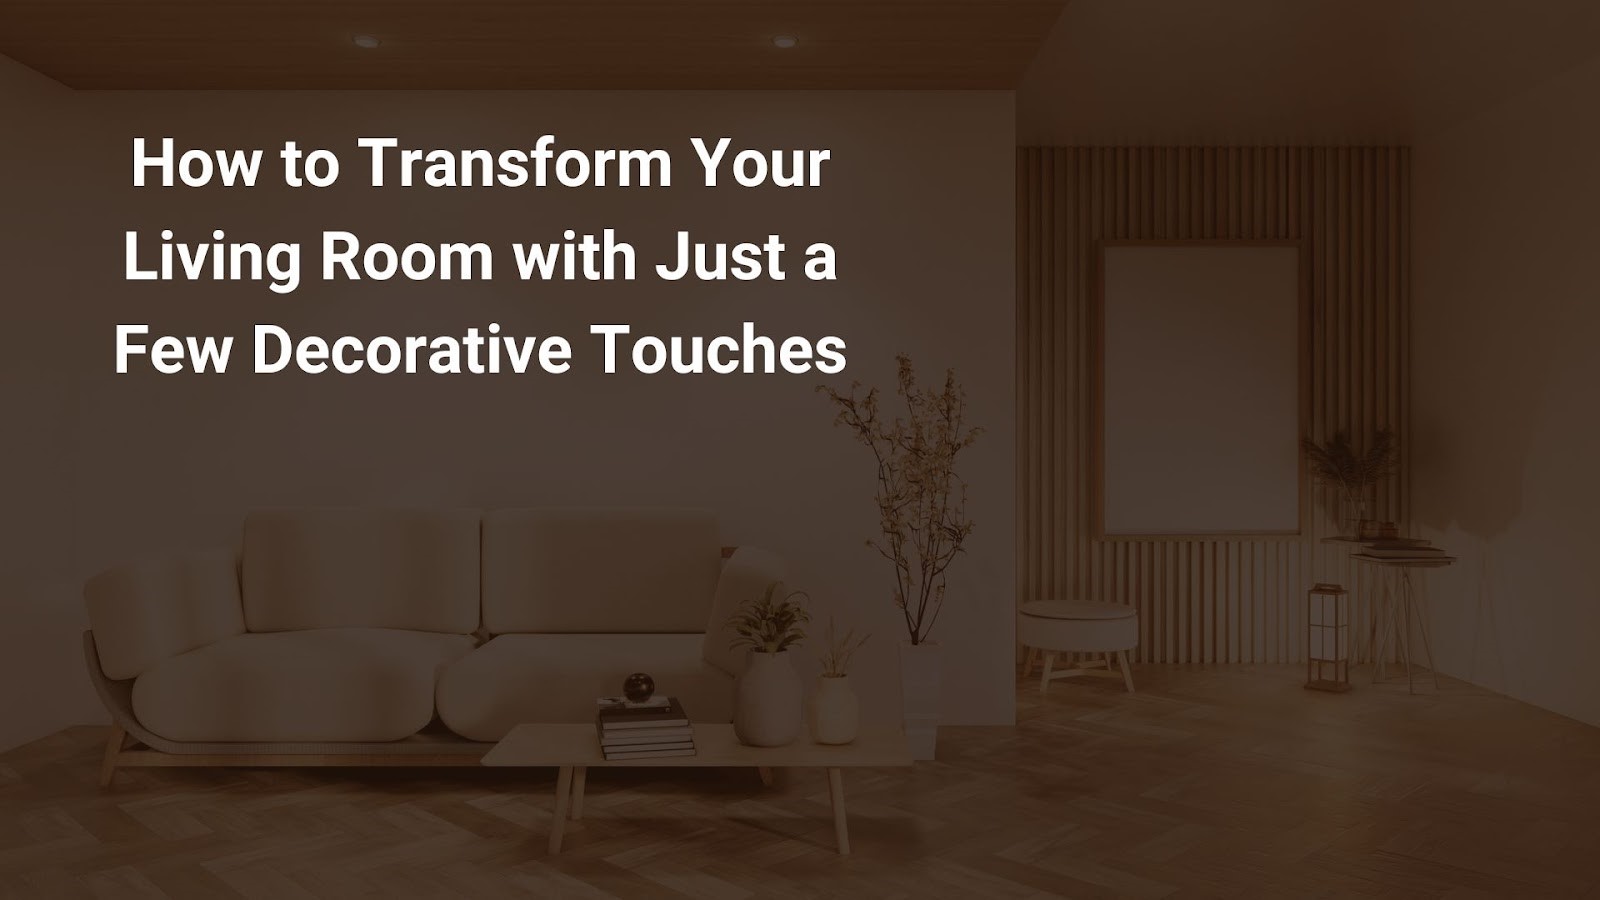 How to Transform Your Living Room with Just a Few Decorative Touches